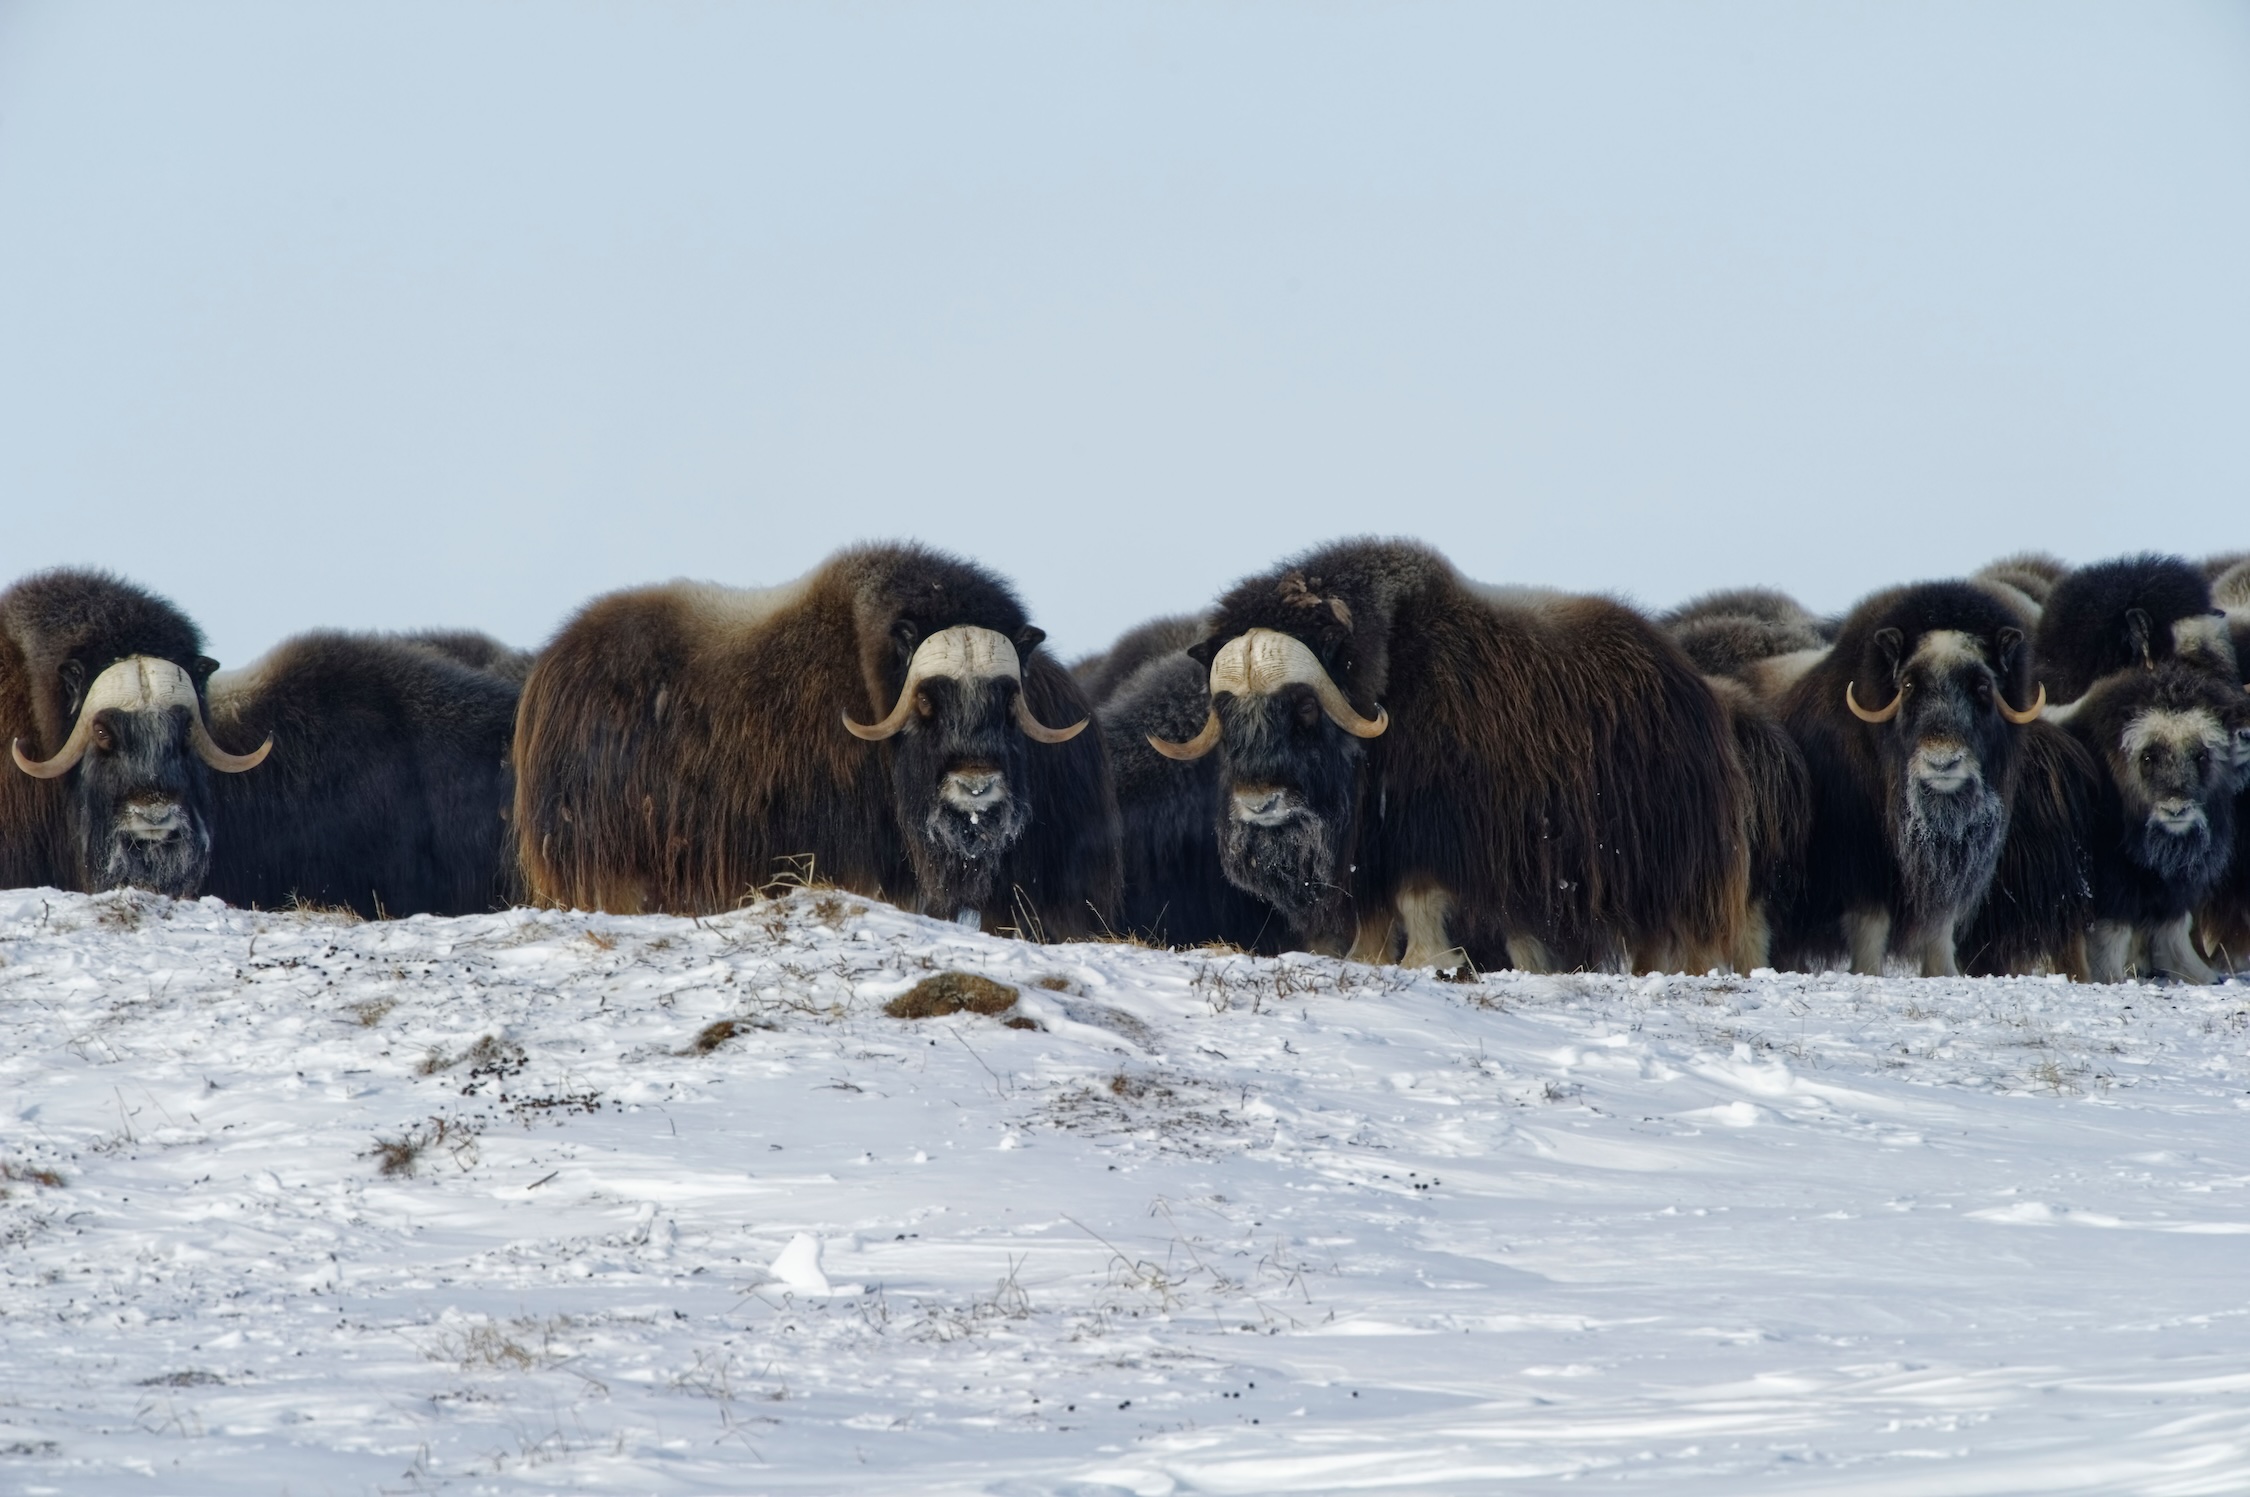 A herd of muskoxen withstanding the frigid winter as one. Image Credit: Wirestock, Envato Elements.